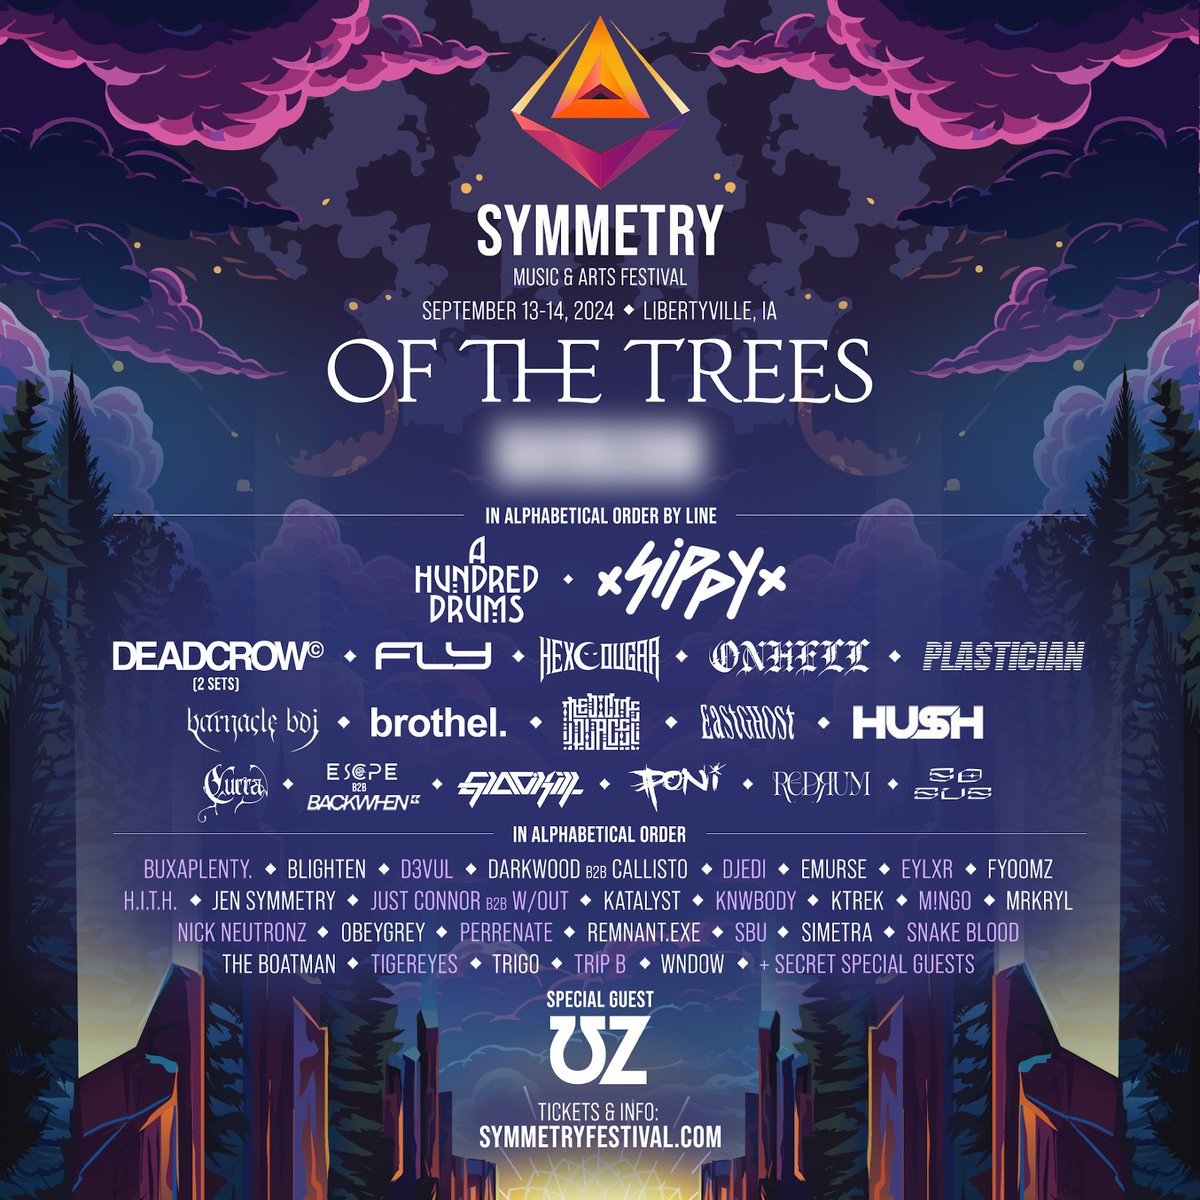 stoked to announce that i'll be playing @SymFestival this September! truly honored to be performing alongside so many incredible wave & experimental bass music artists. if you're tired of festivals booking the same rotation of artists over and over again... this one is for you